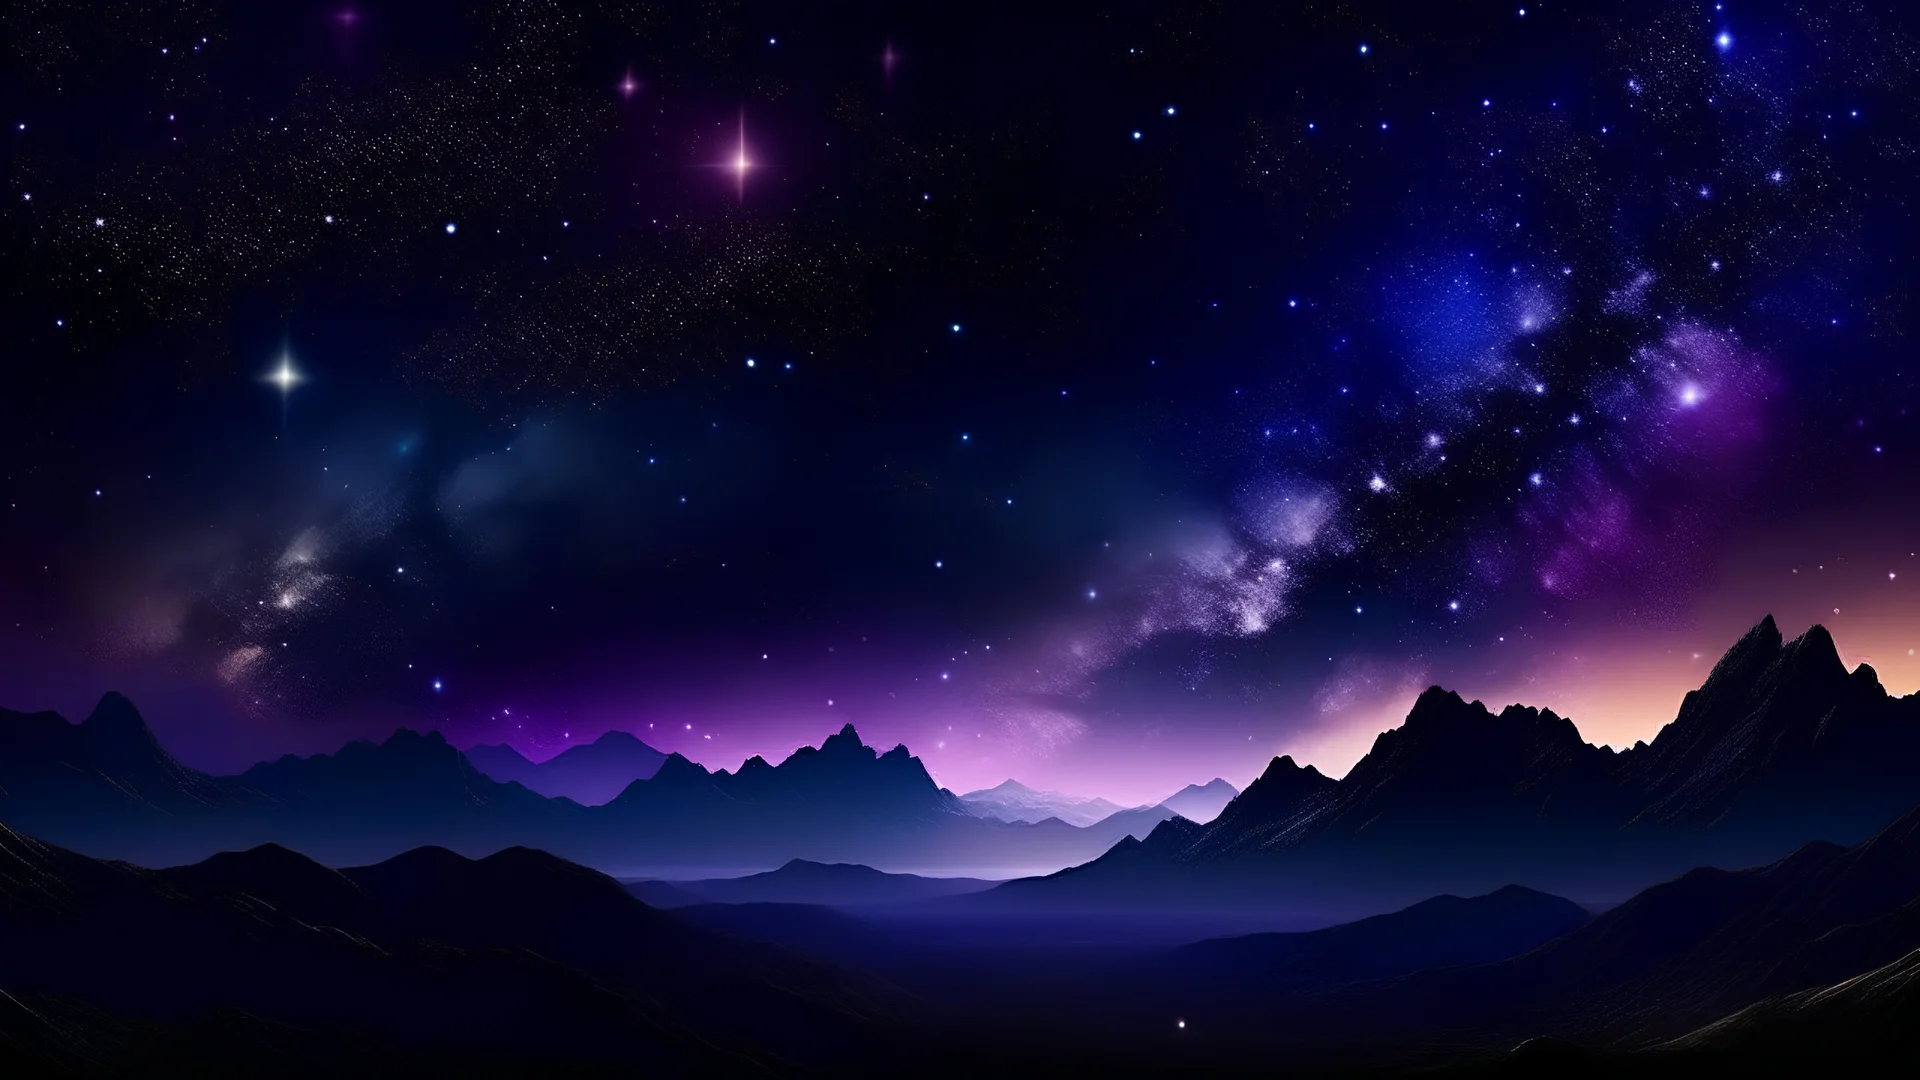 Night sky with visible stars and galaxies above and mountains on the ground a high fantasy vibe, purpleish hue